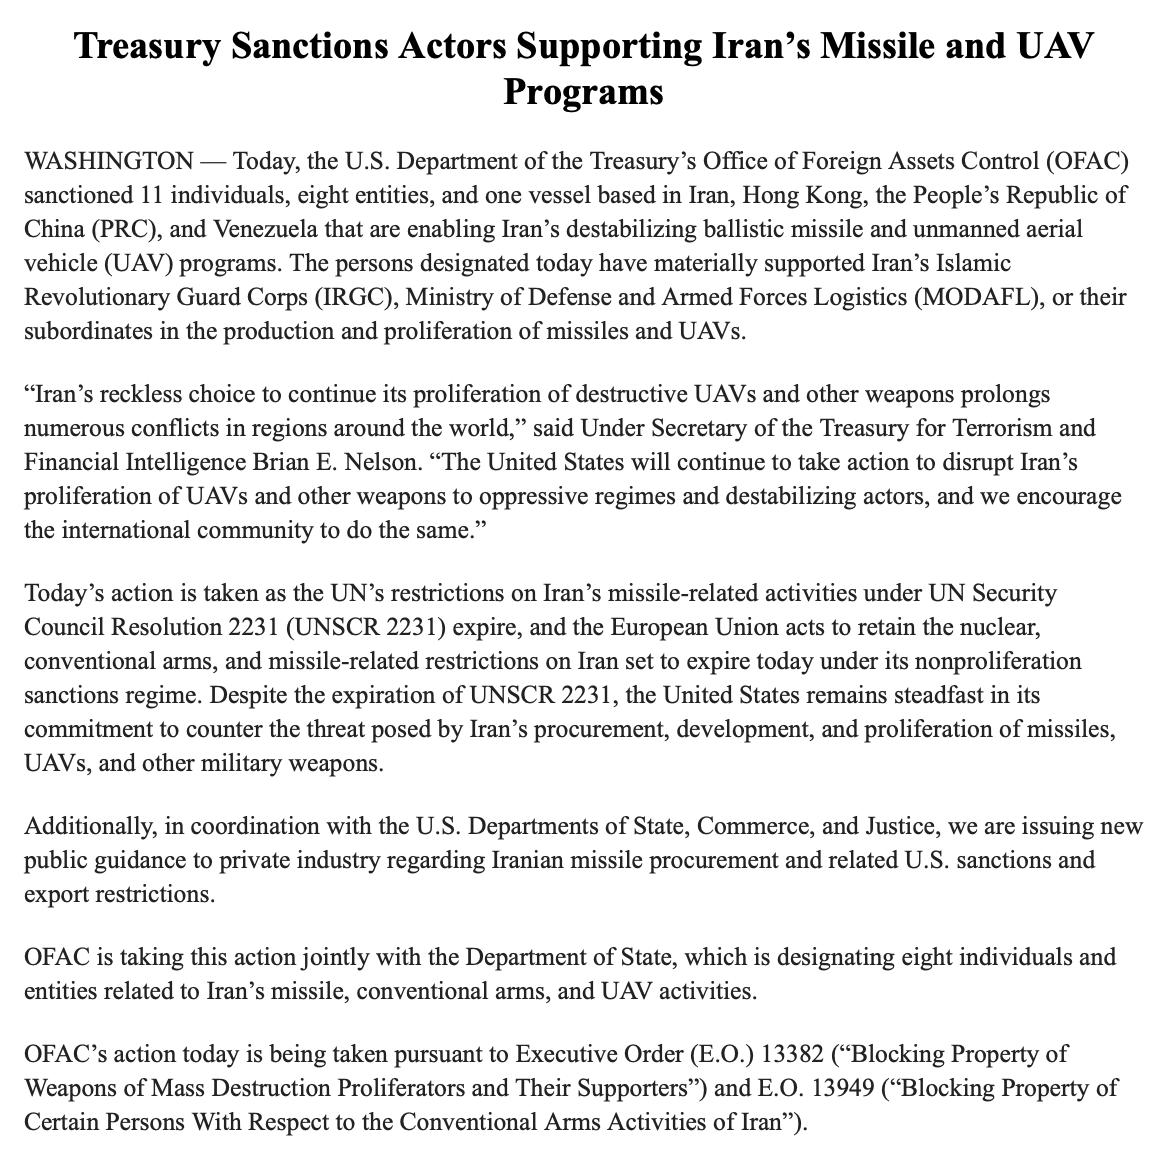 US rolls out sanctions vs individuals & entities in Iran, HongKong, China & Venezuela that are enabling Iran’s destabilizing ballistic missile and unmanned aerial vehicle (UAV) programs per @USTreasury